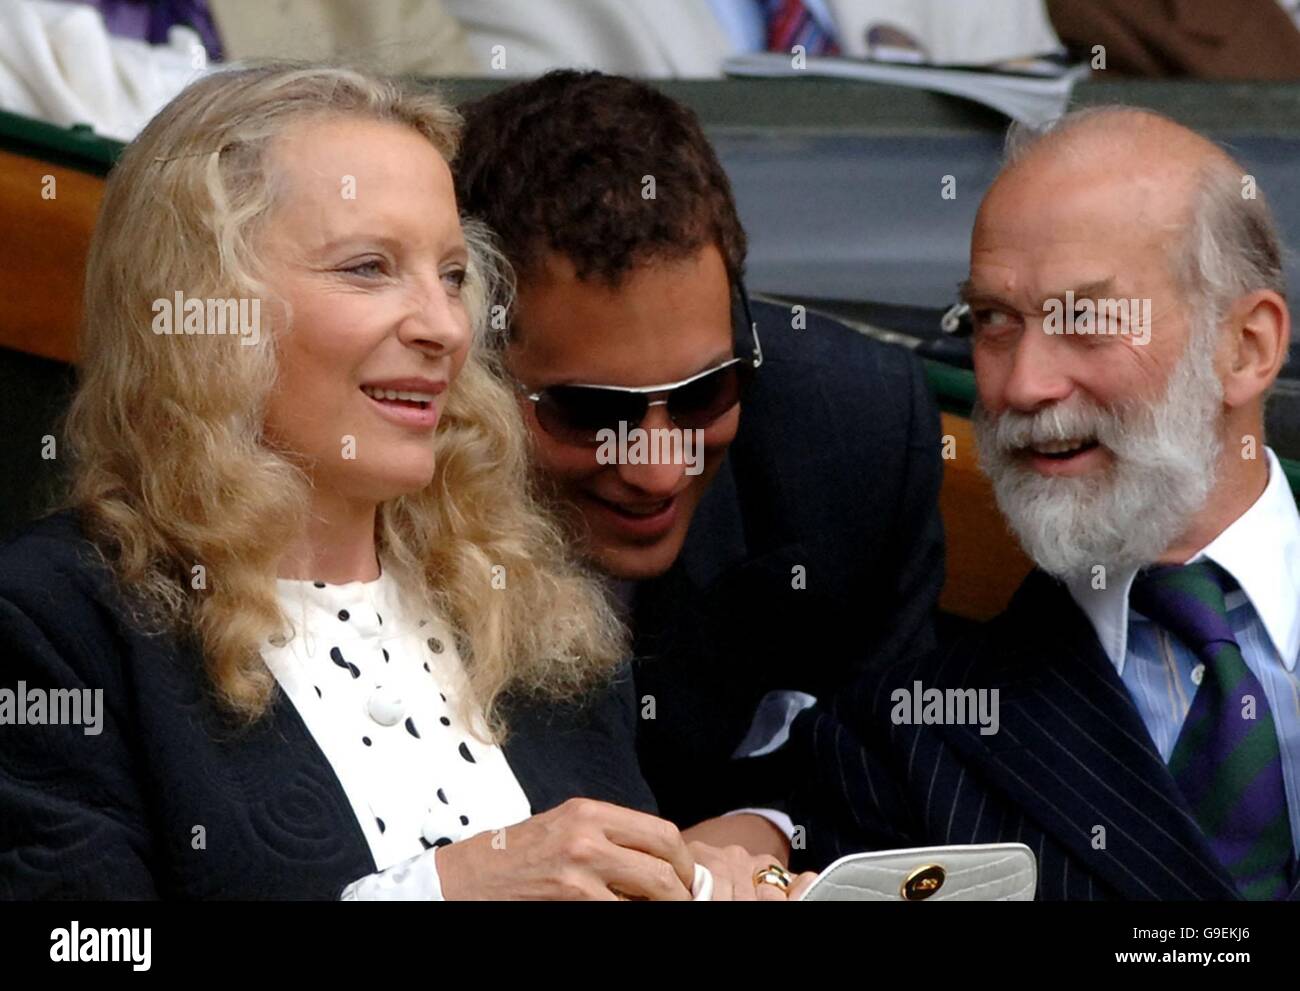 Prince and Princess Michael of Kent with their son Freddie Windsor in the Royal Box at Wimbledon during the Men's singles final. Stock Photo